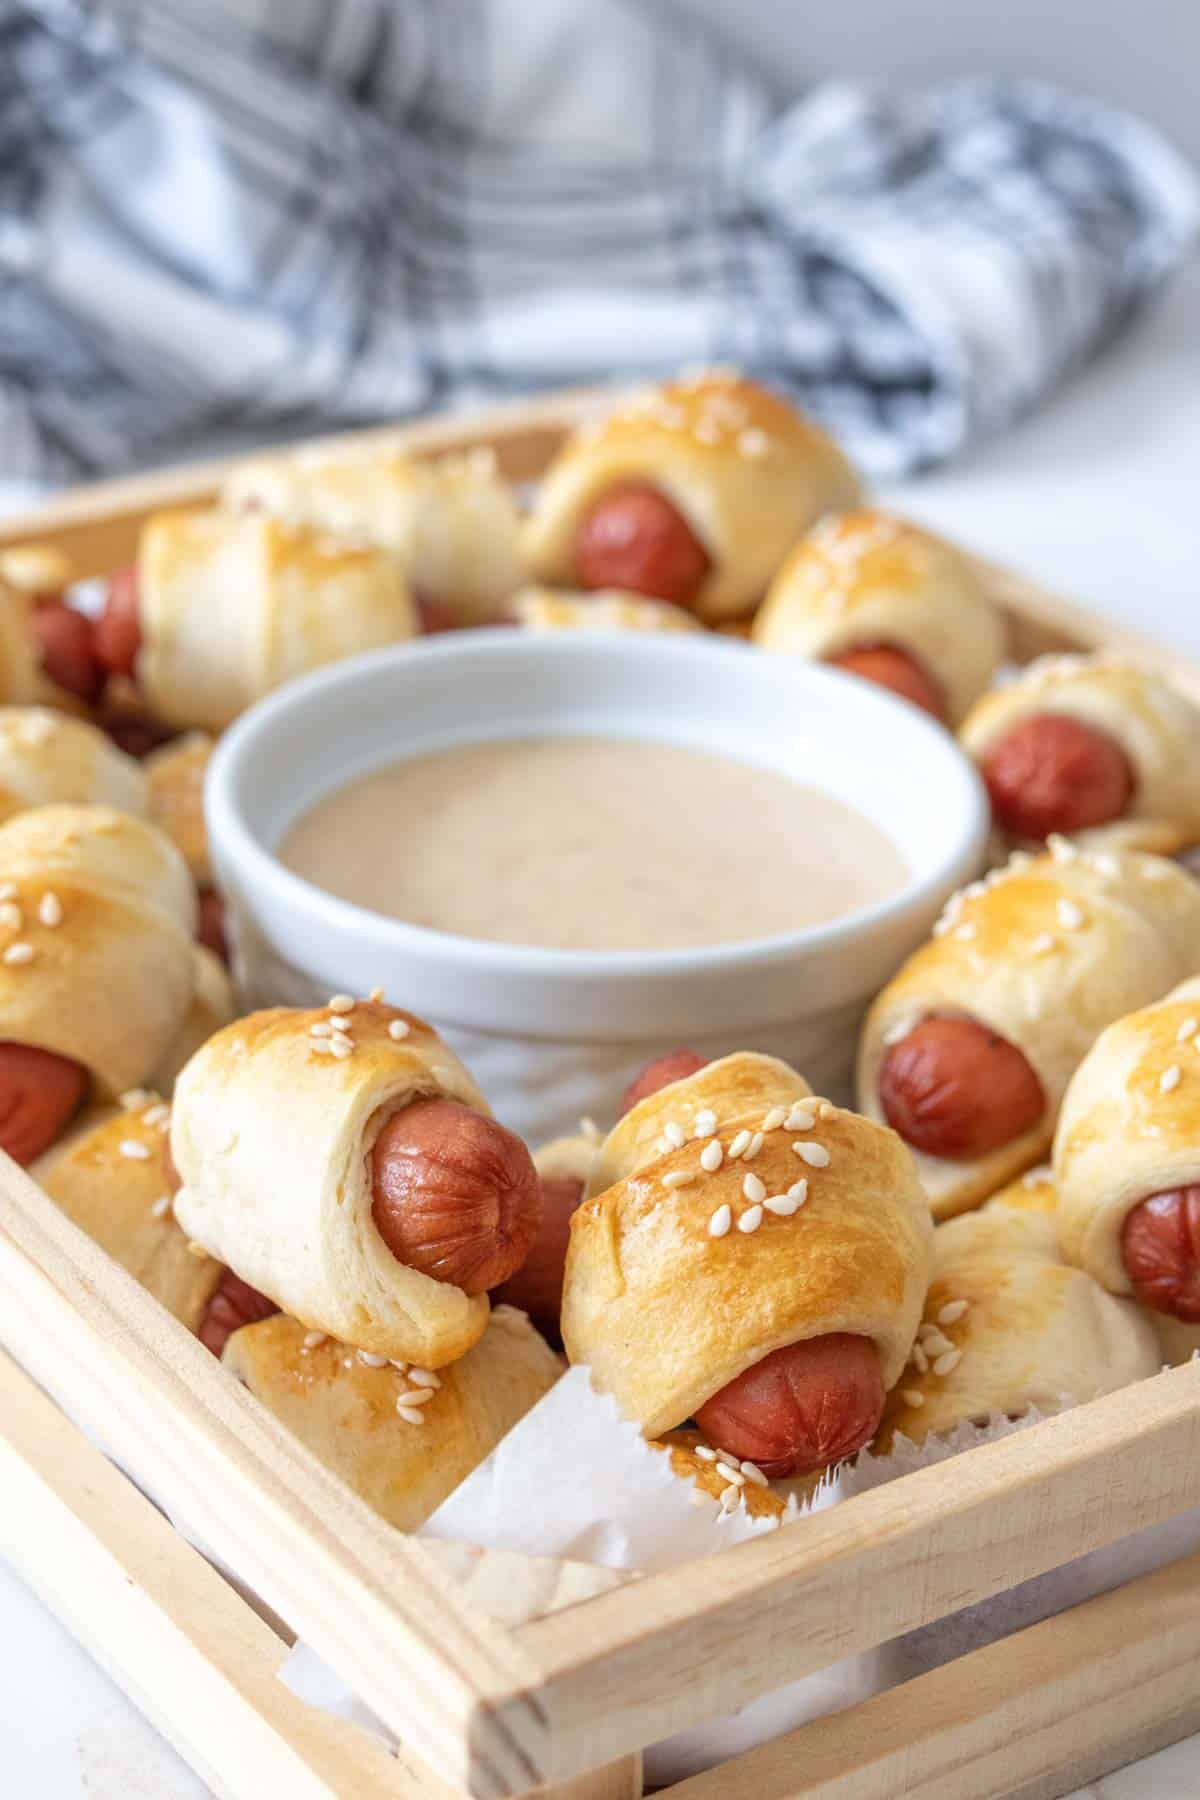 Serving platter of pigs in a blanket with sauce.